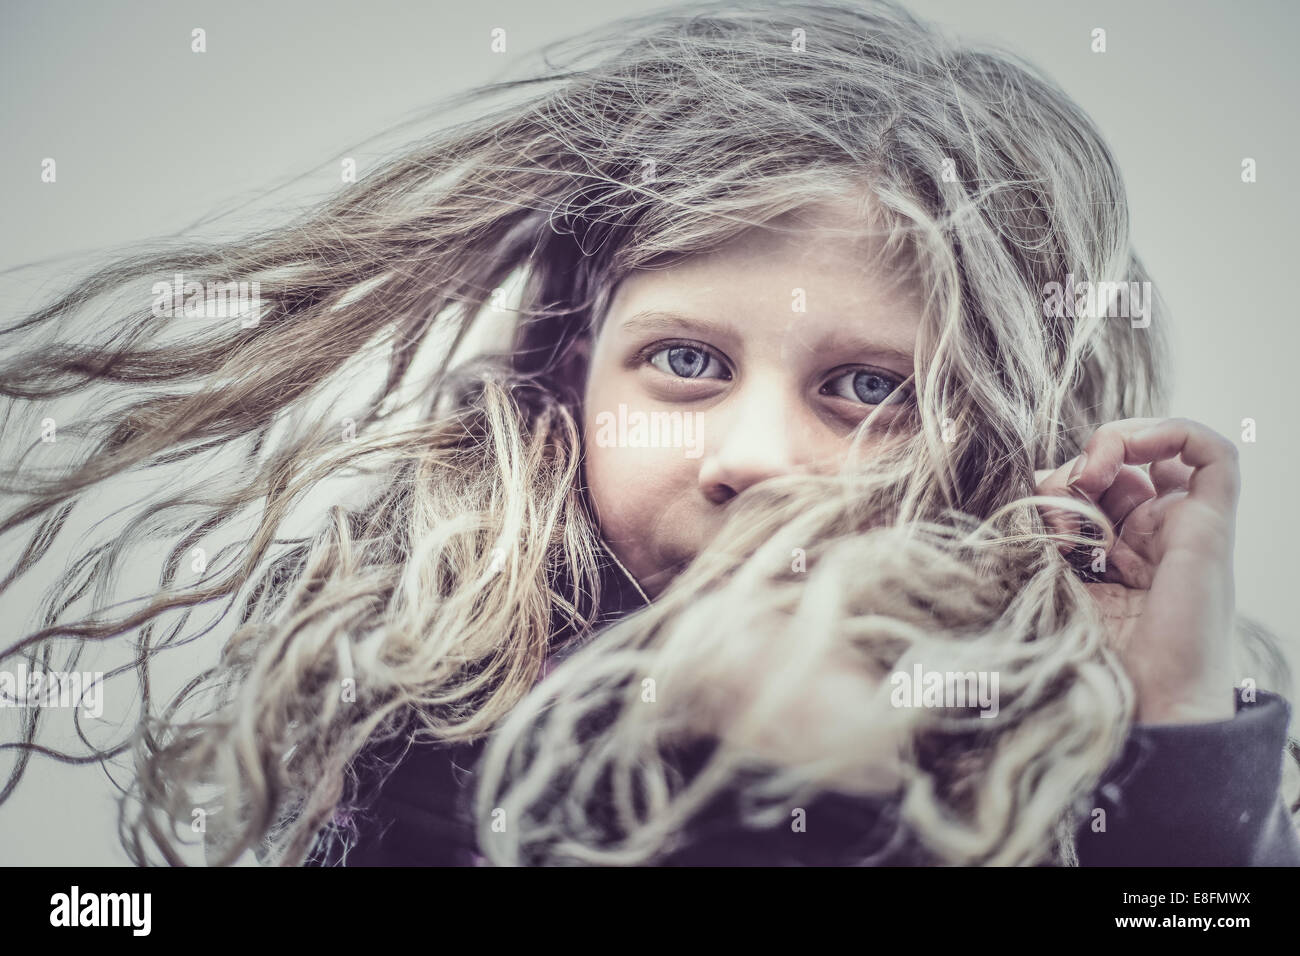 Portrait of a girl with windswept hair Stock Photo